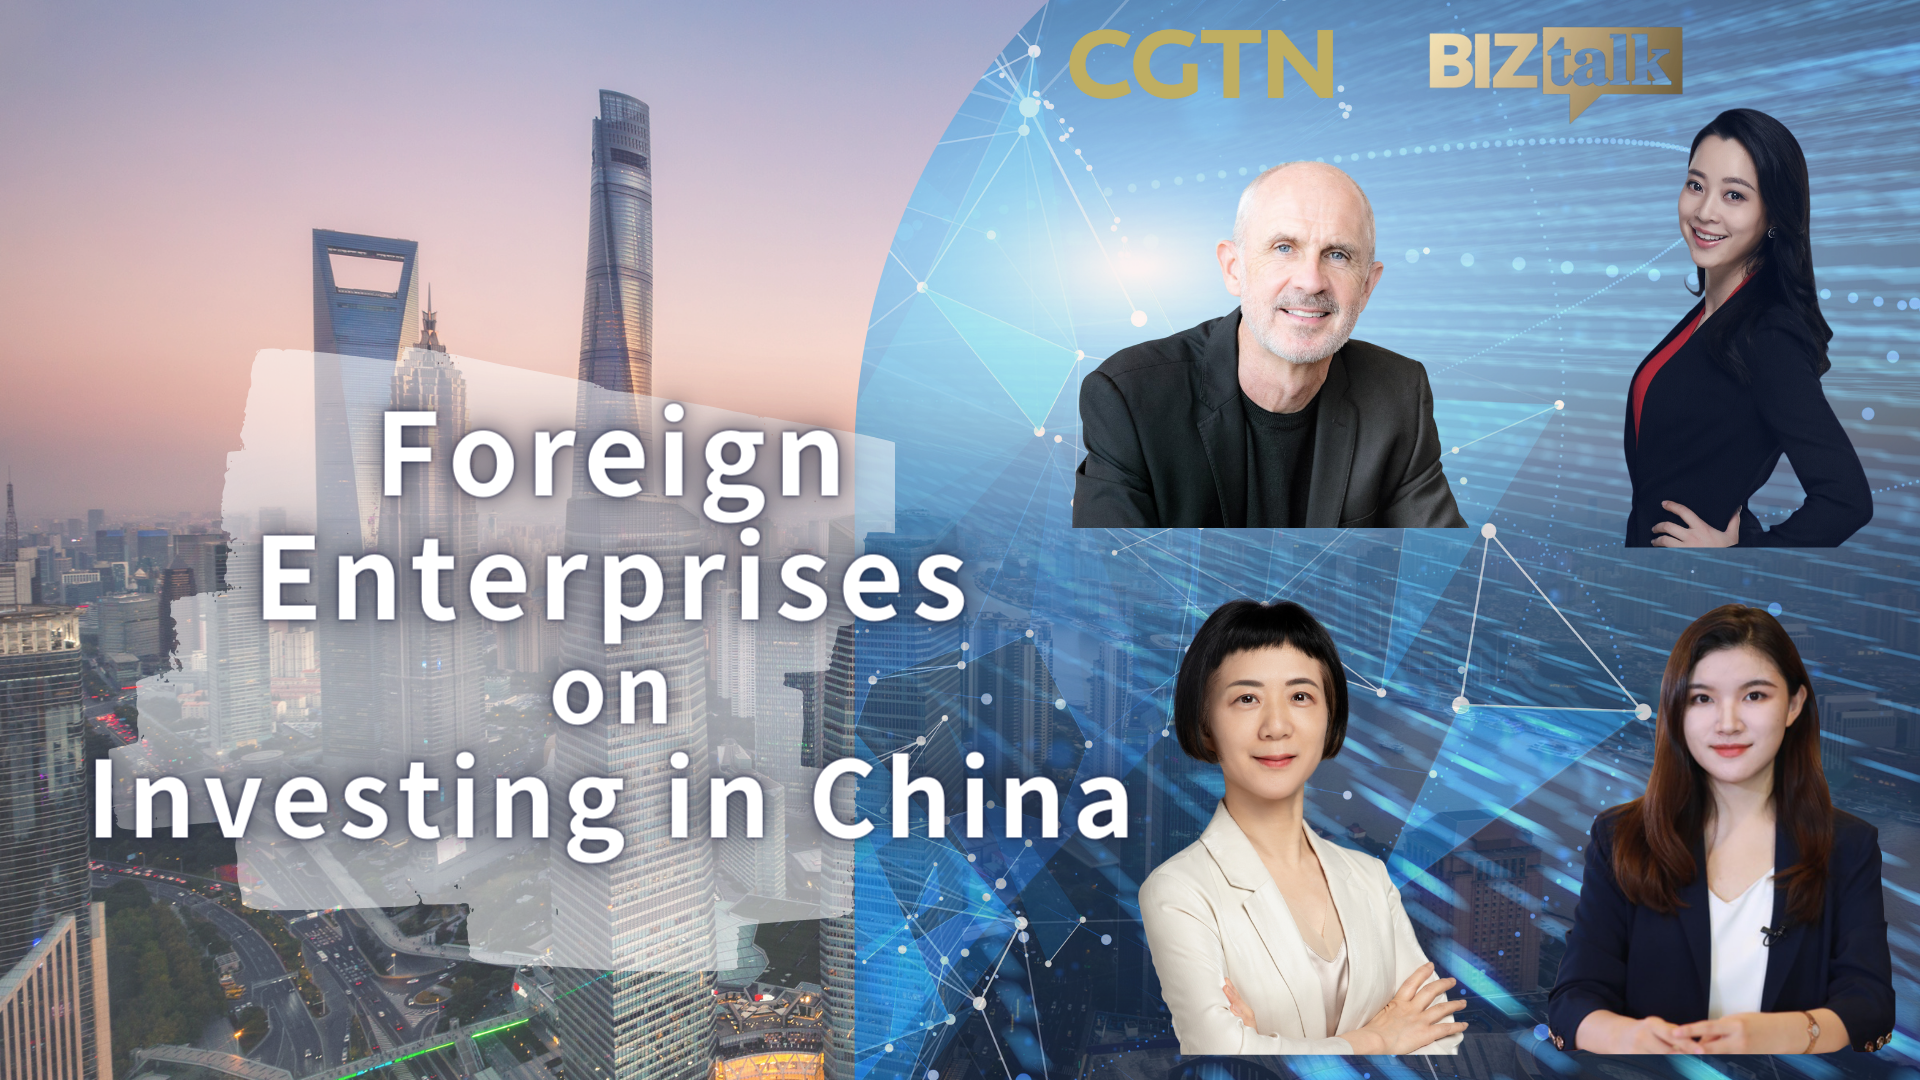 Watch: Foreign enterprises on investing in China